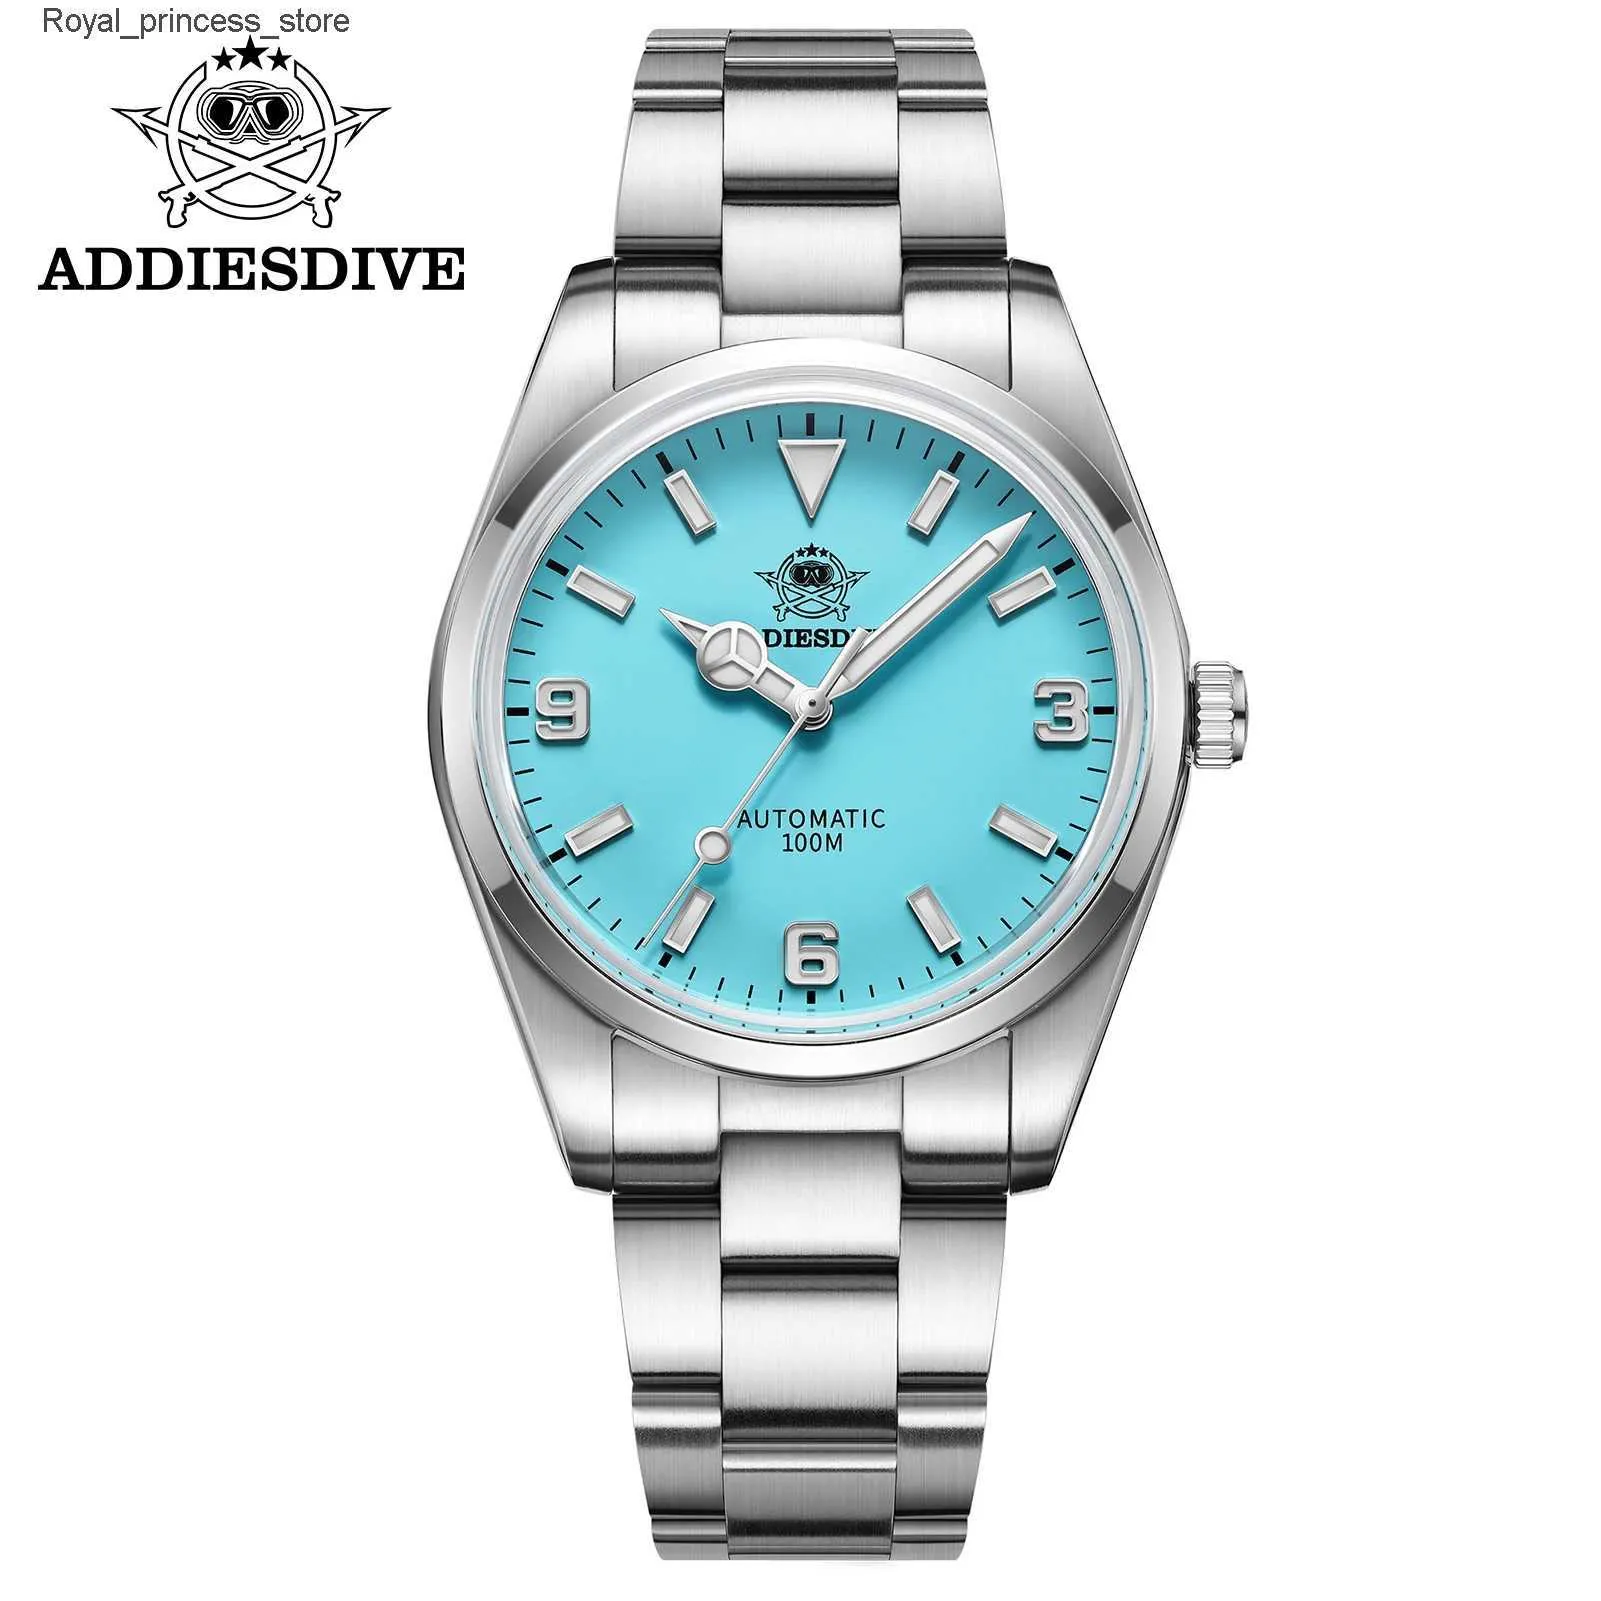 Other Watches ADDIESDIVE Explorer Mens 38mm Sapphire Bubble Mirror Pot Cover Glass BGW9 Super Luminous m Diver Stainless Steel Q240301